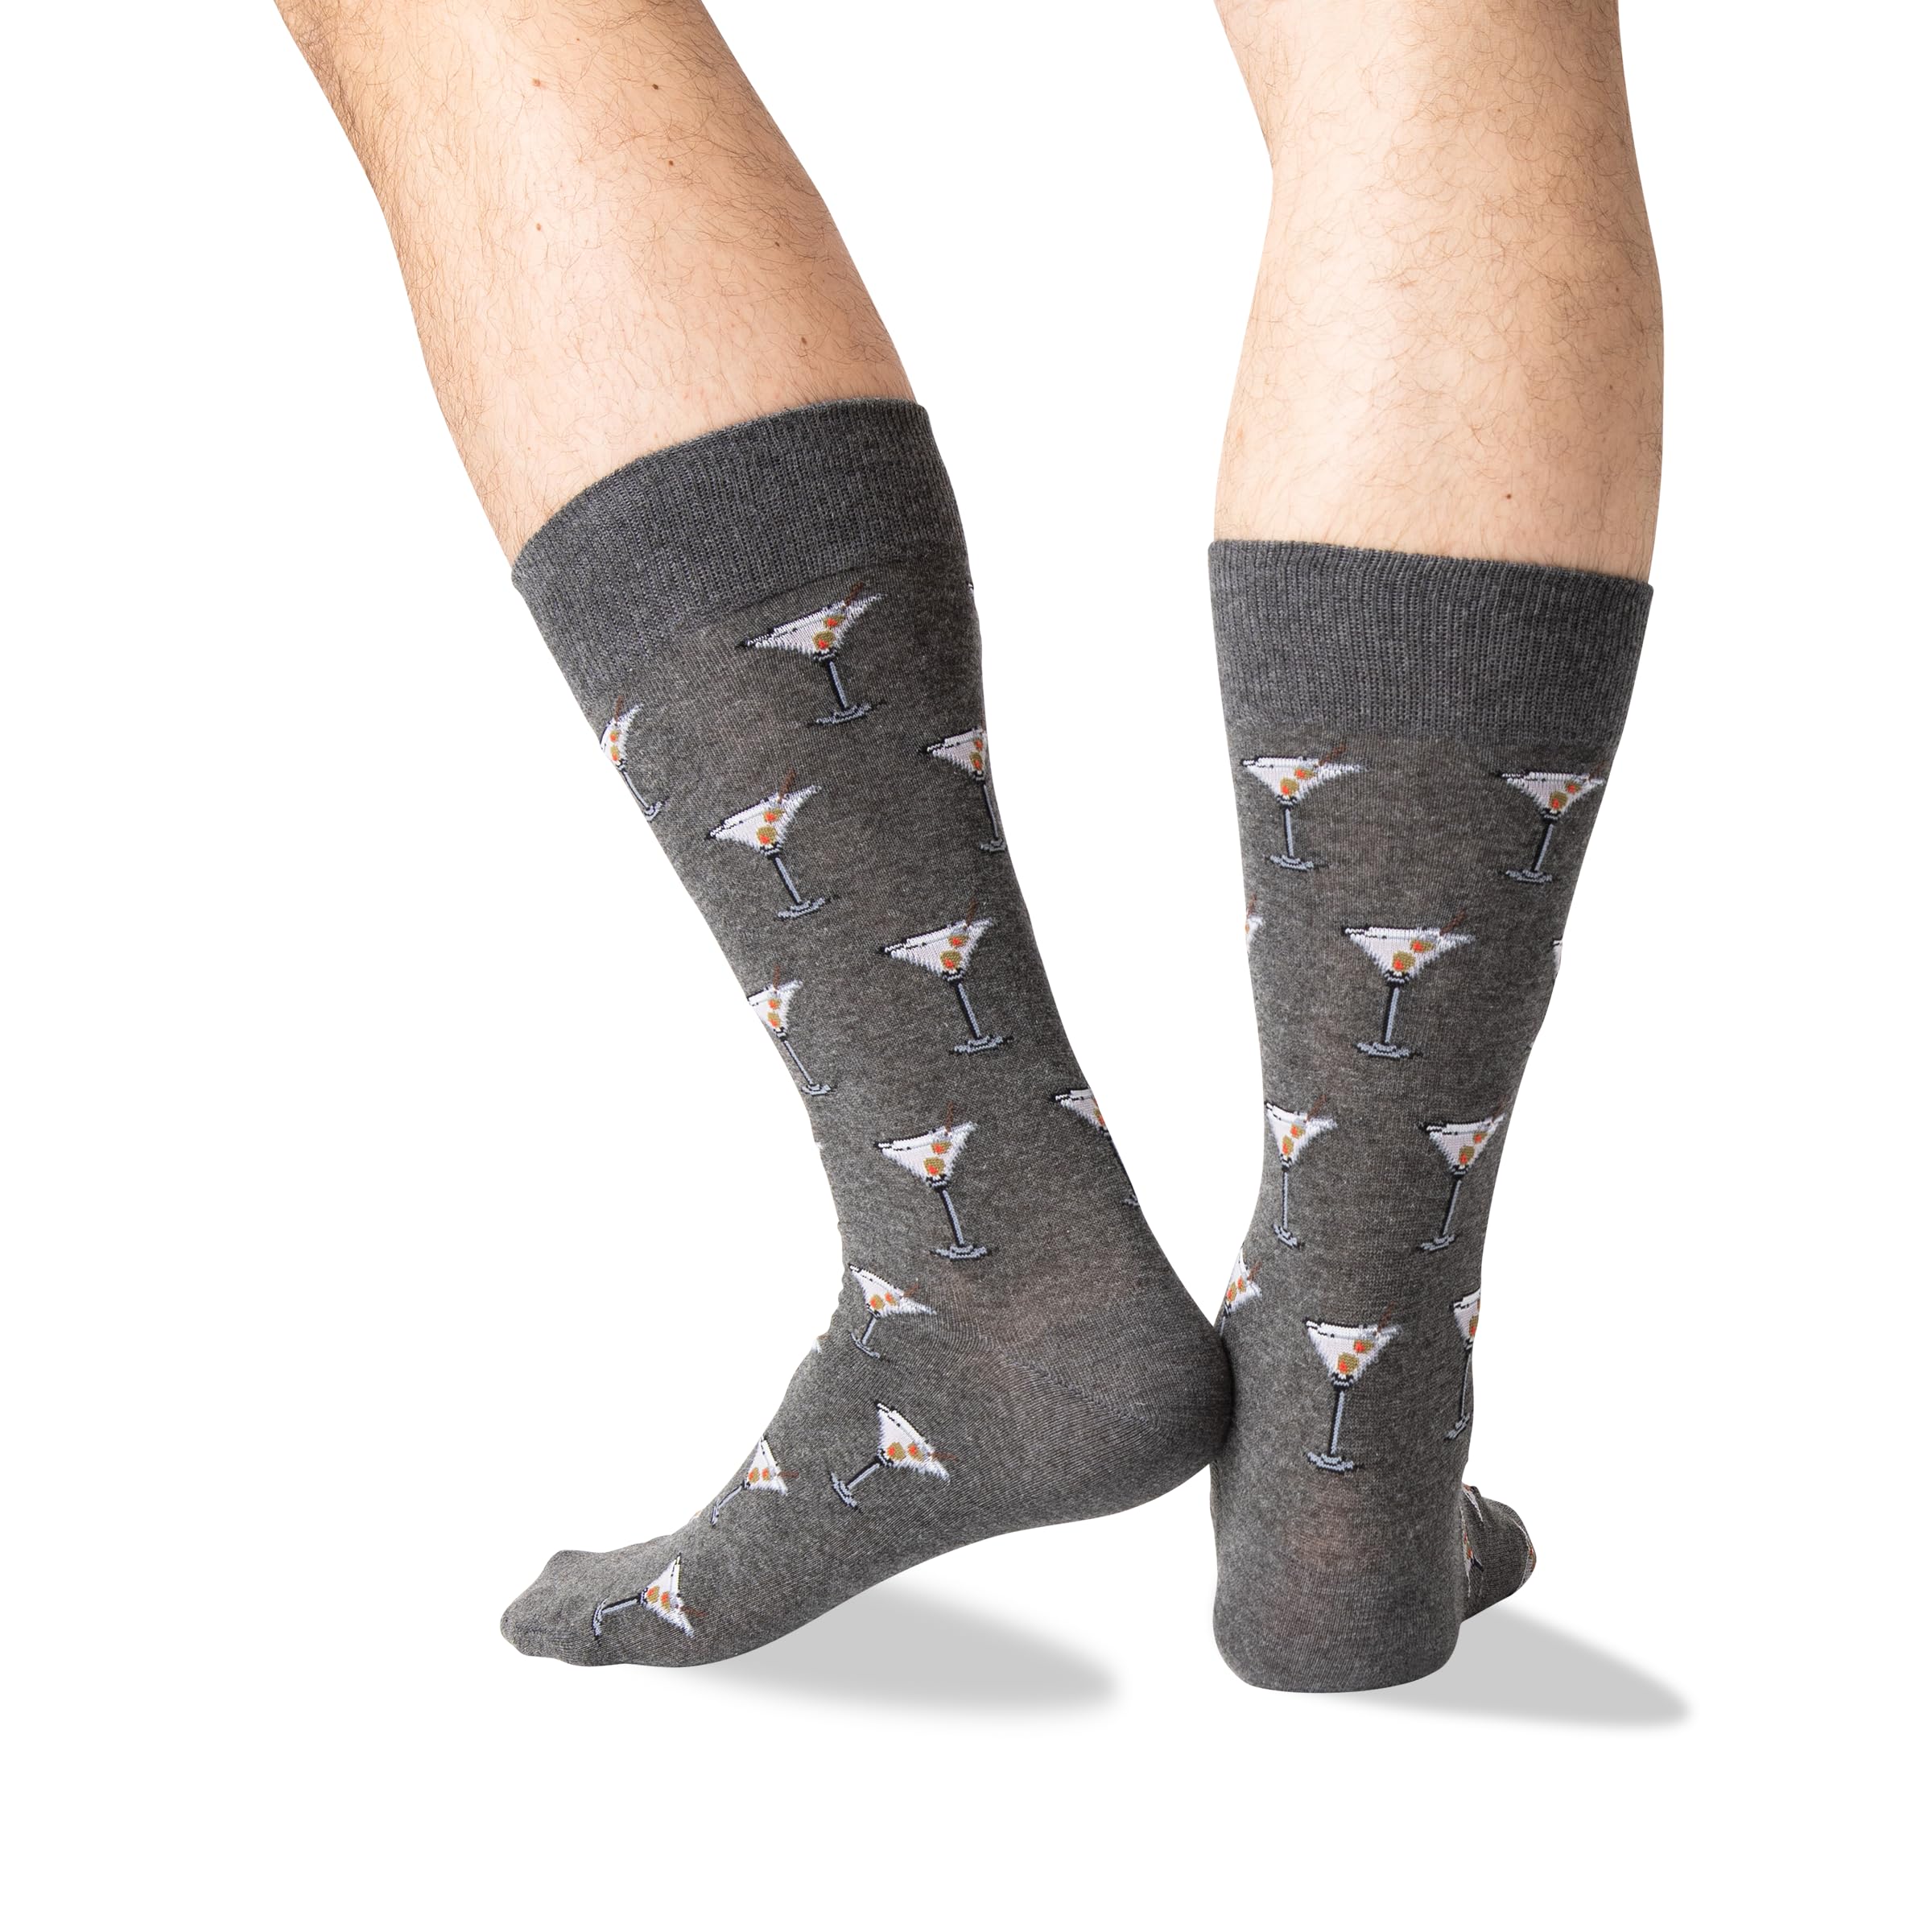 Hot Sox Men's Fun Cocktail Drinks Crew Socks-1 Pair Pack-Cool & Funny Happy Hour Gifts